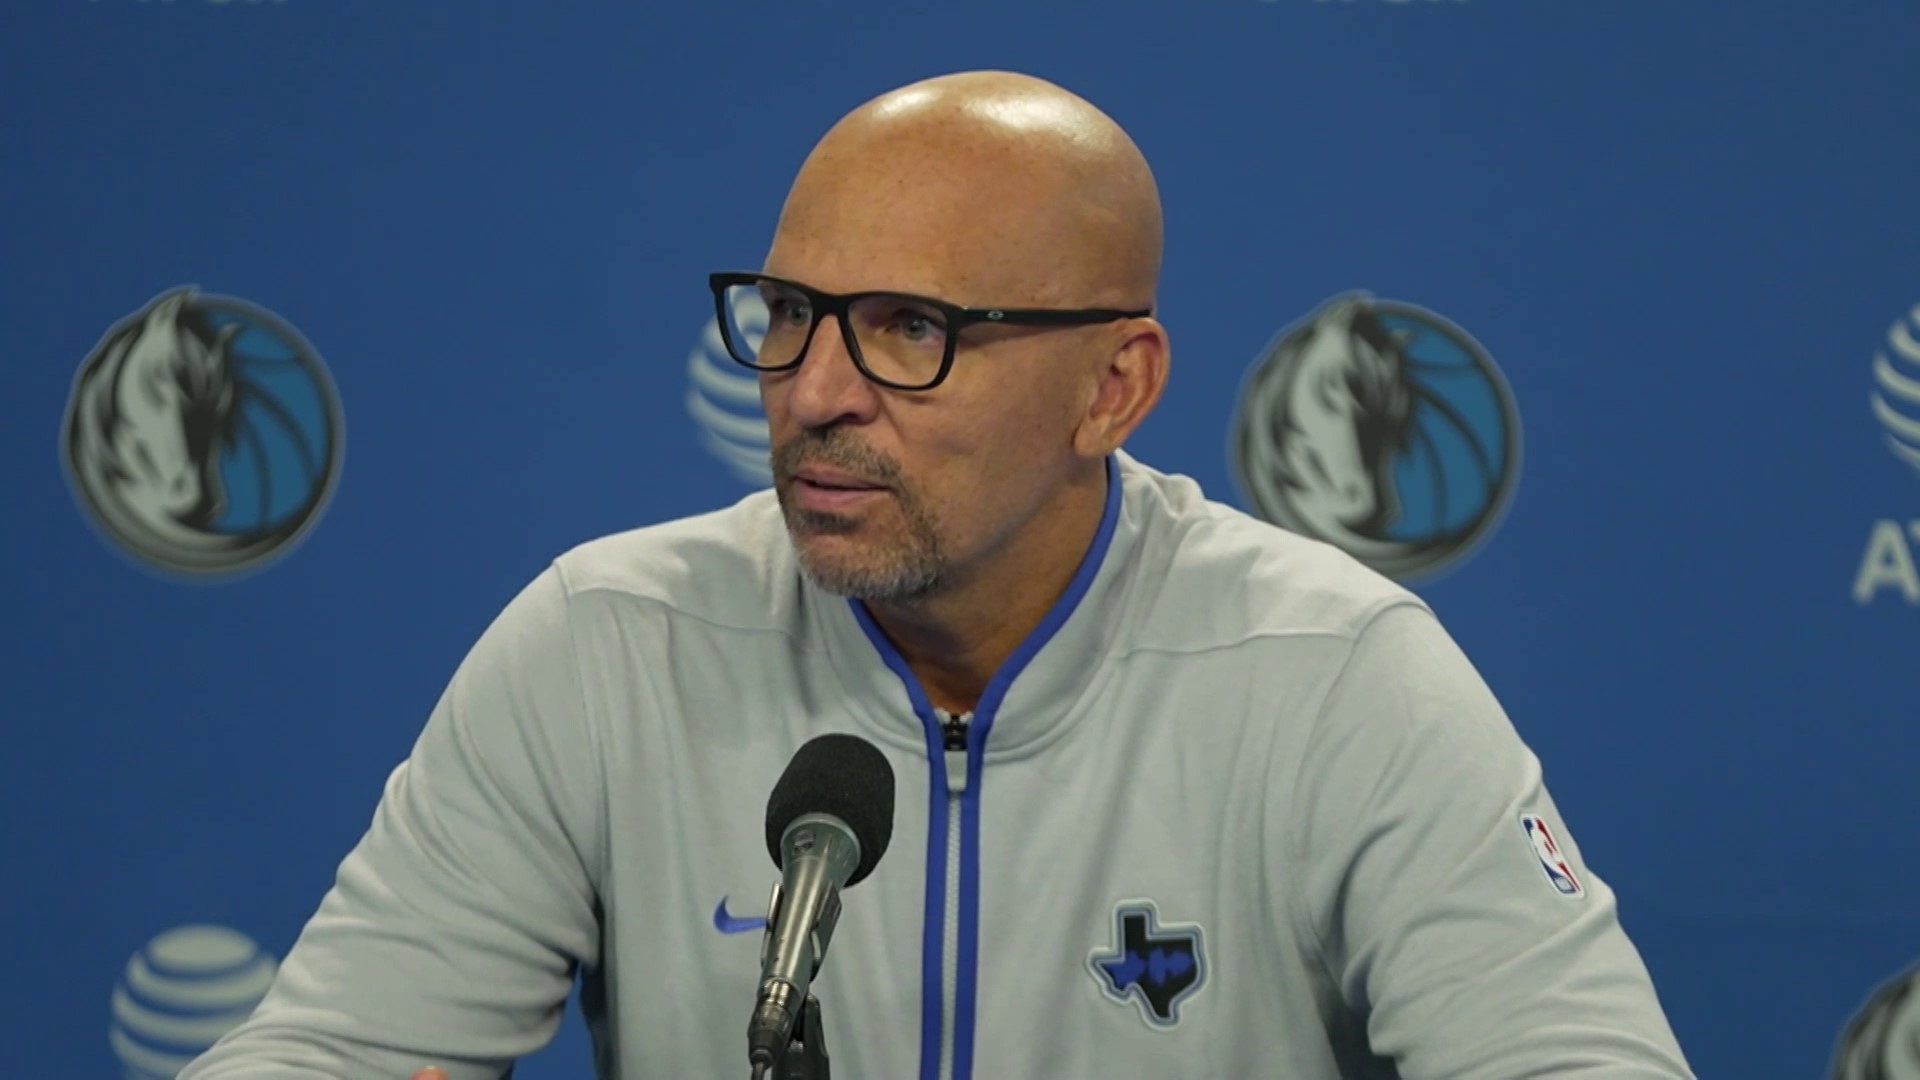 Responding to a question about the Mavs' performance in clutch situations this season, Kidd dropped a cuss-filled rant on media coverage of his team's improvement.